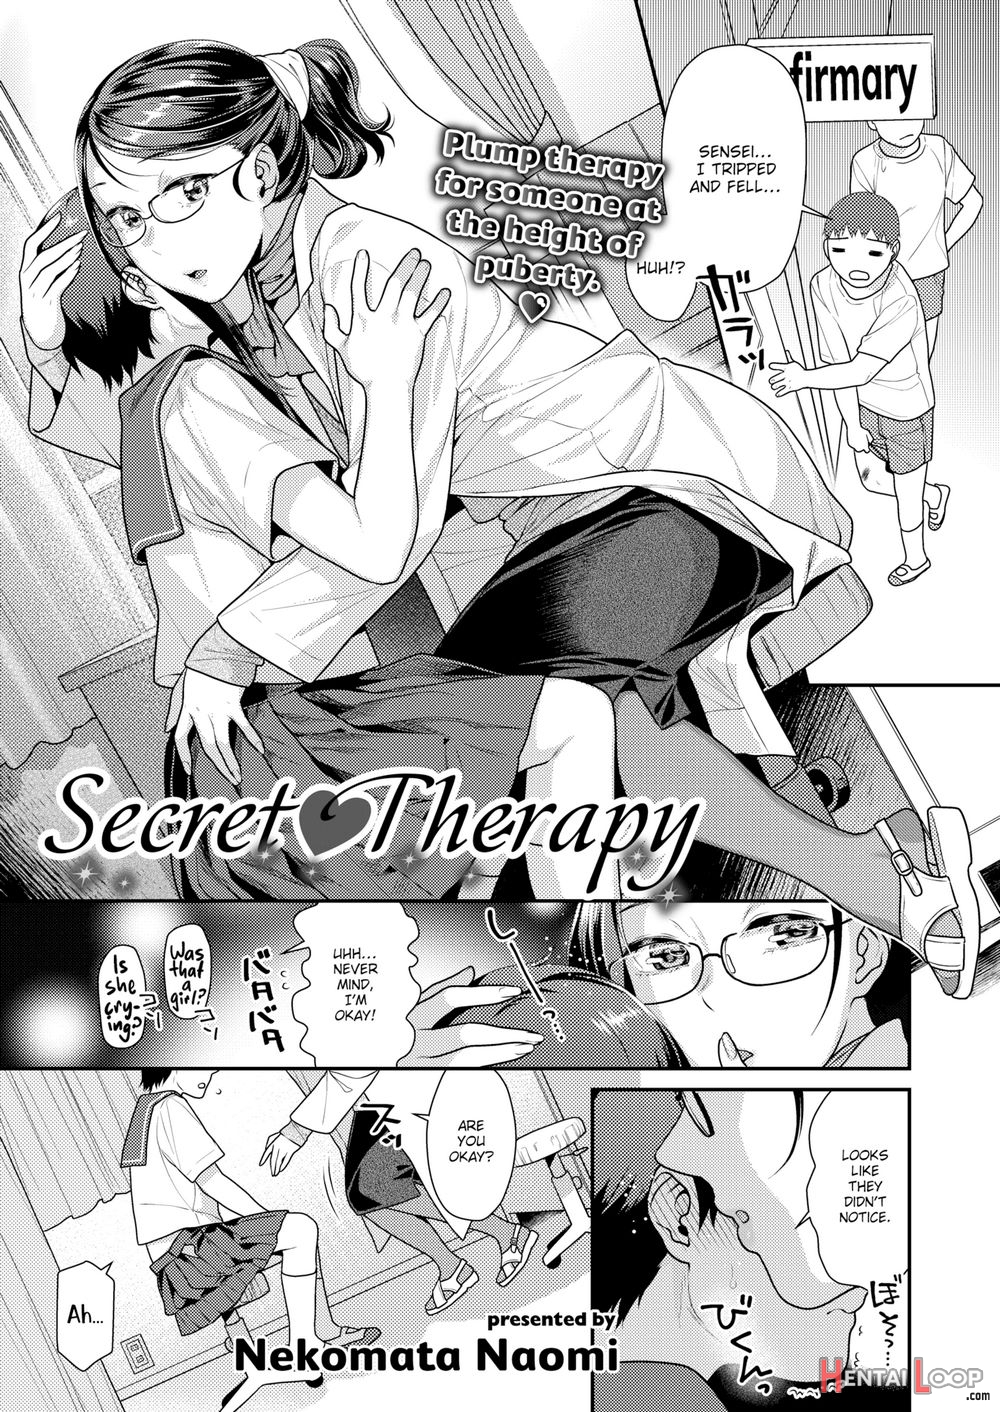 Secret Therapy page 1